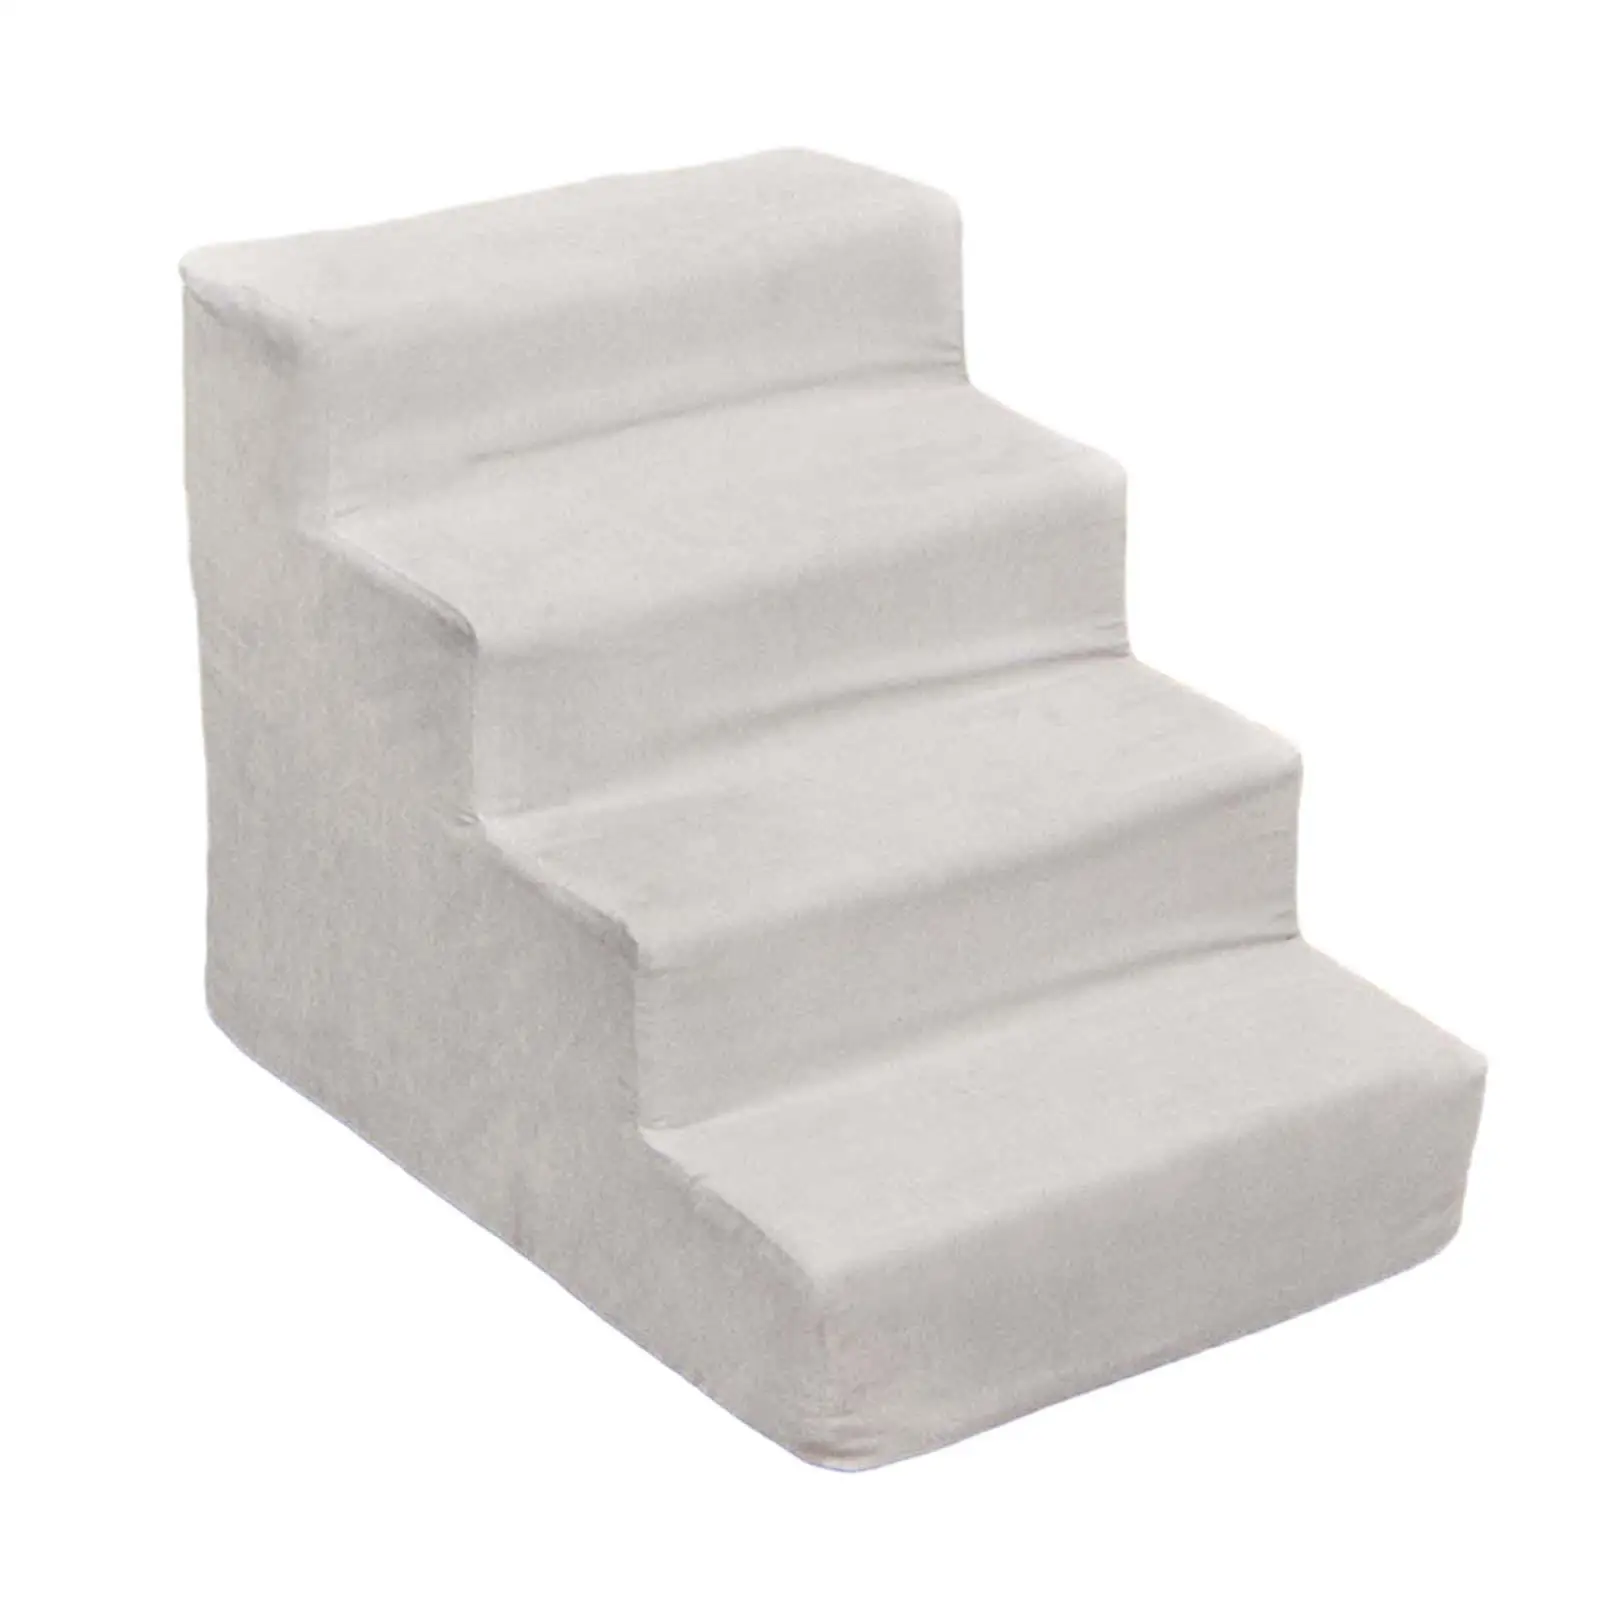 Dog Ramp Stair for Couch, Sofa, and High Bed Climbing High Density Sponge